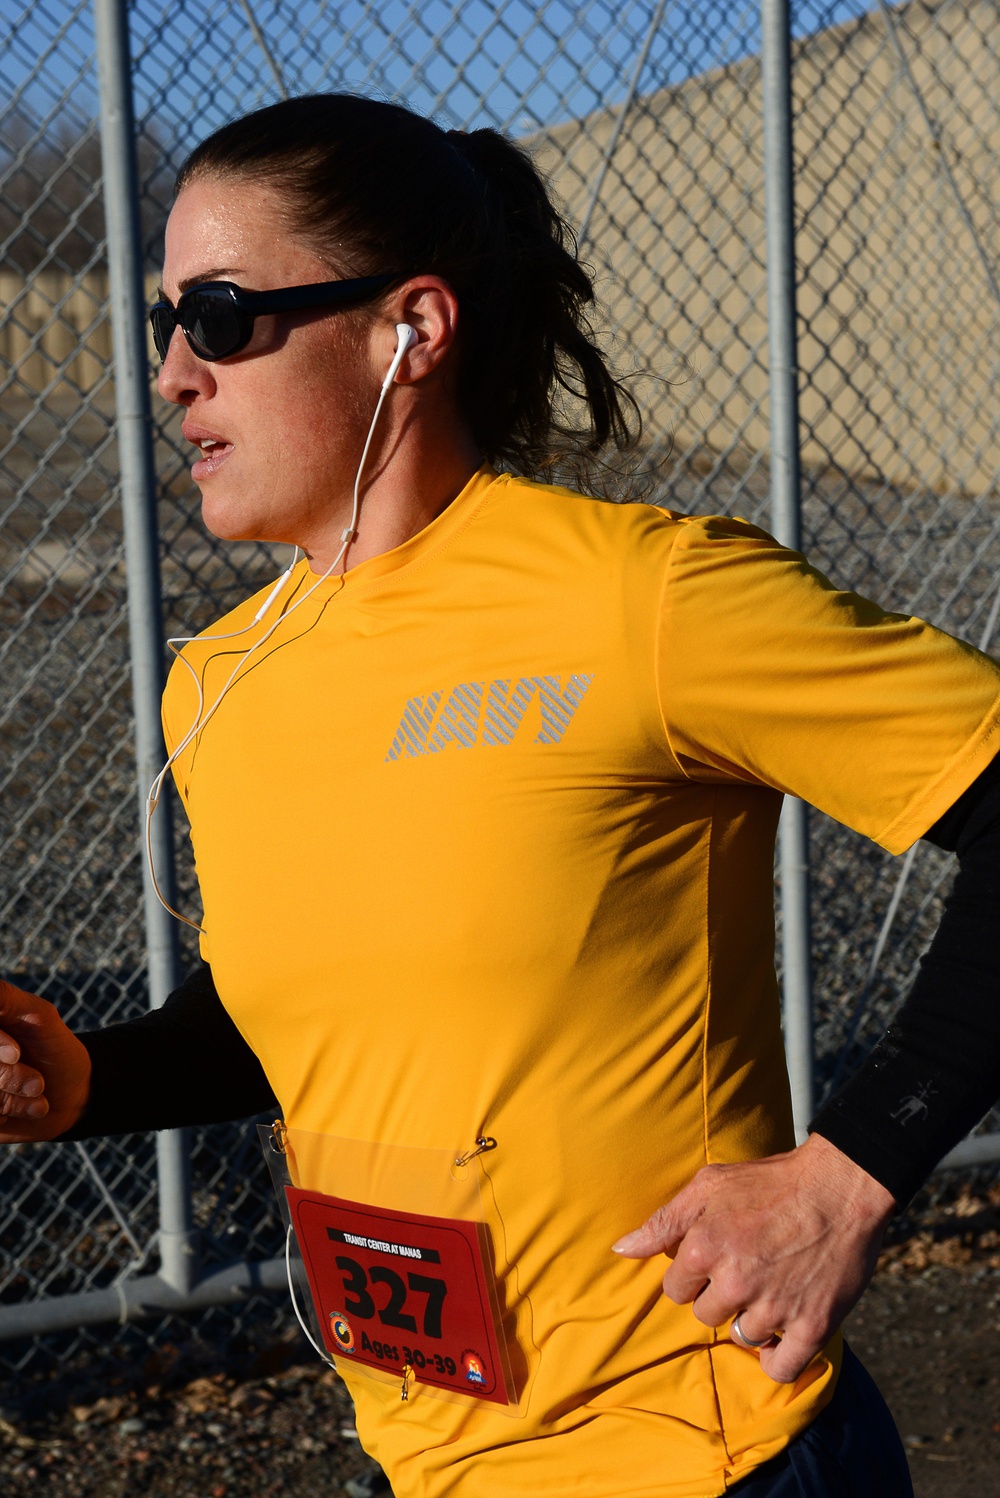 Airman, soldiers trot to Turkey Day finish line